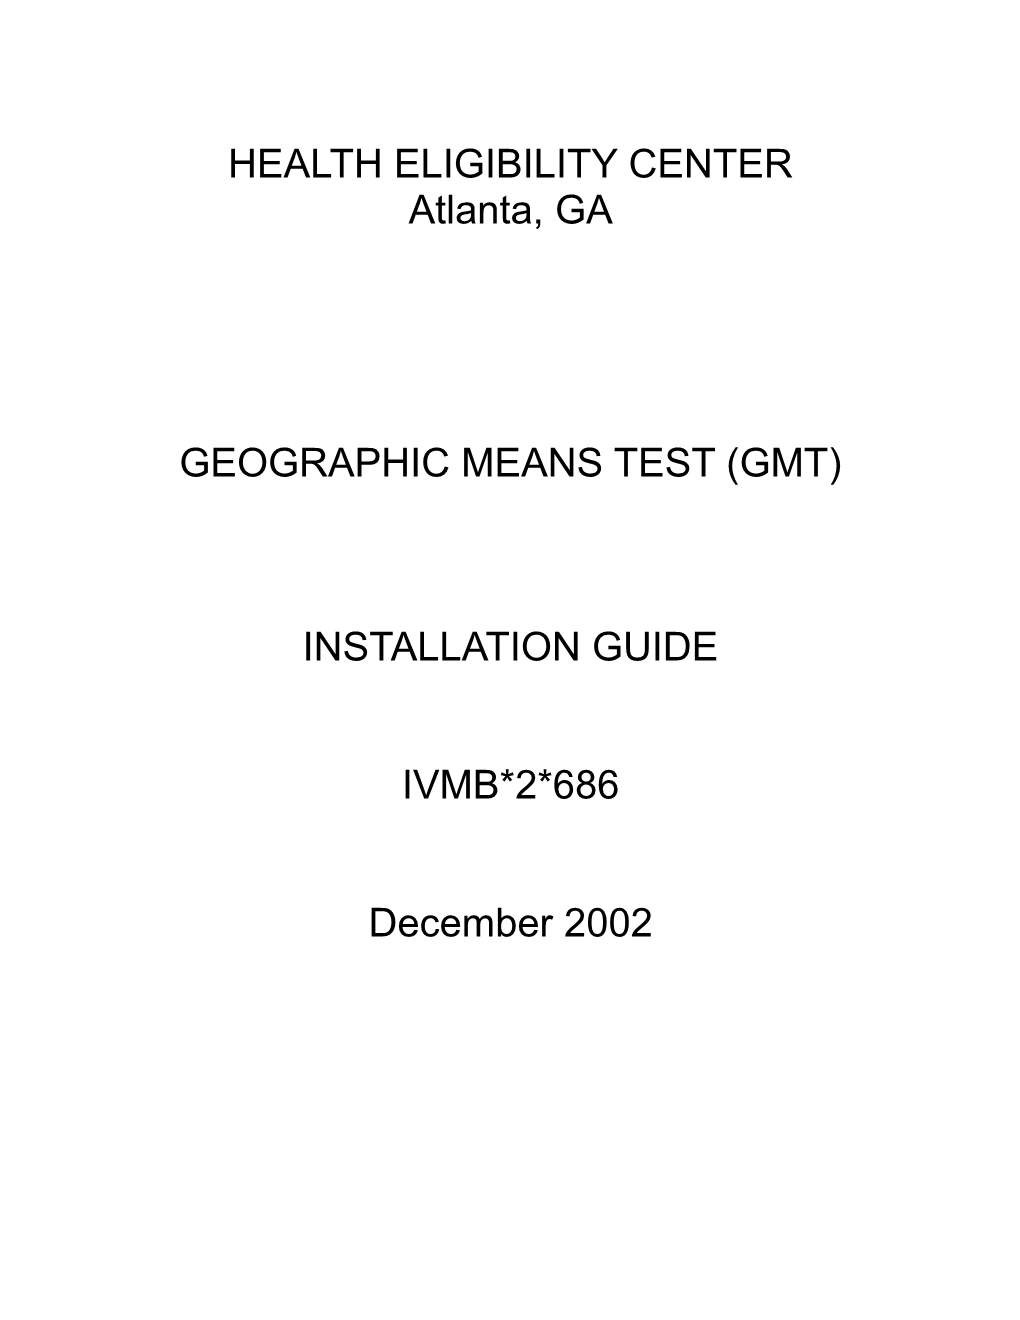 Geographic Means Test (GMT)